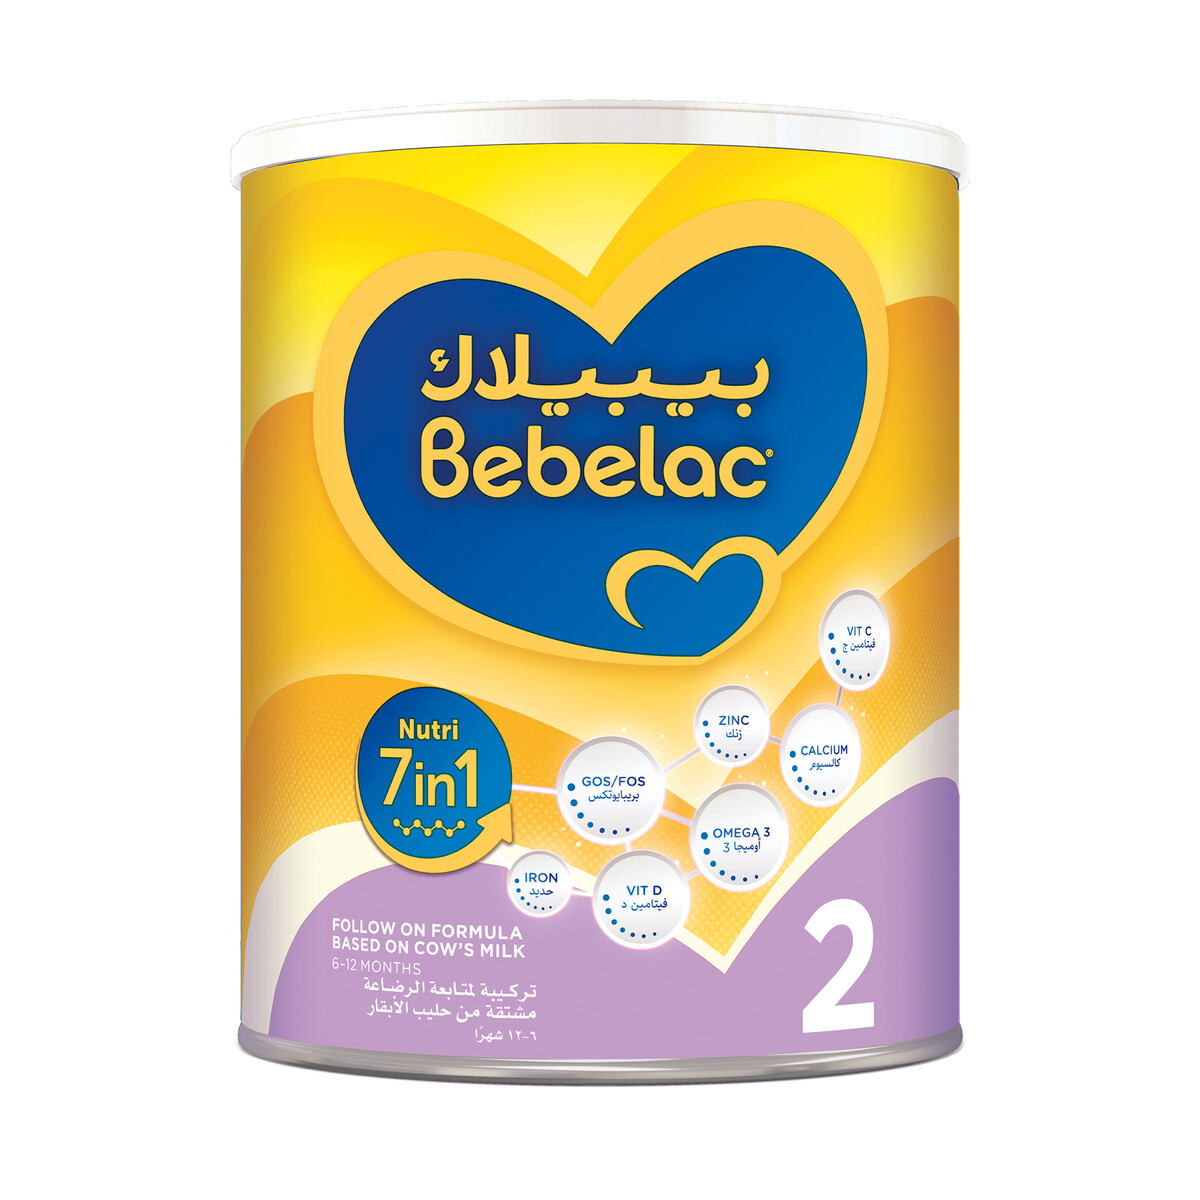 Bebelac Nutri 7in1 Follow On Formula Stage 2 From 6 to 12 Months 400 g